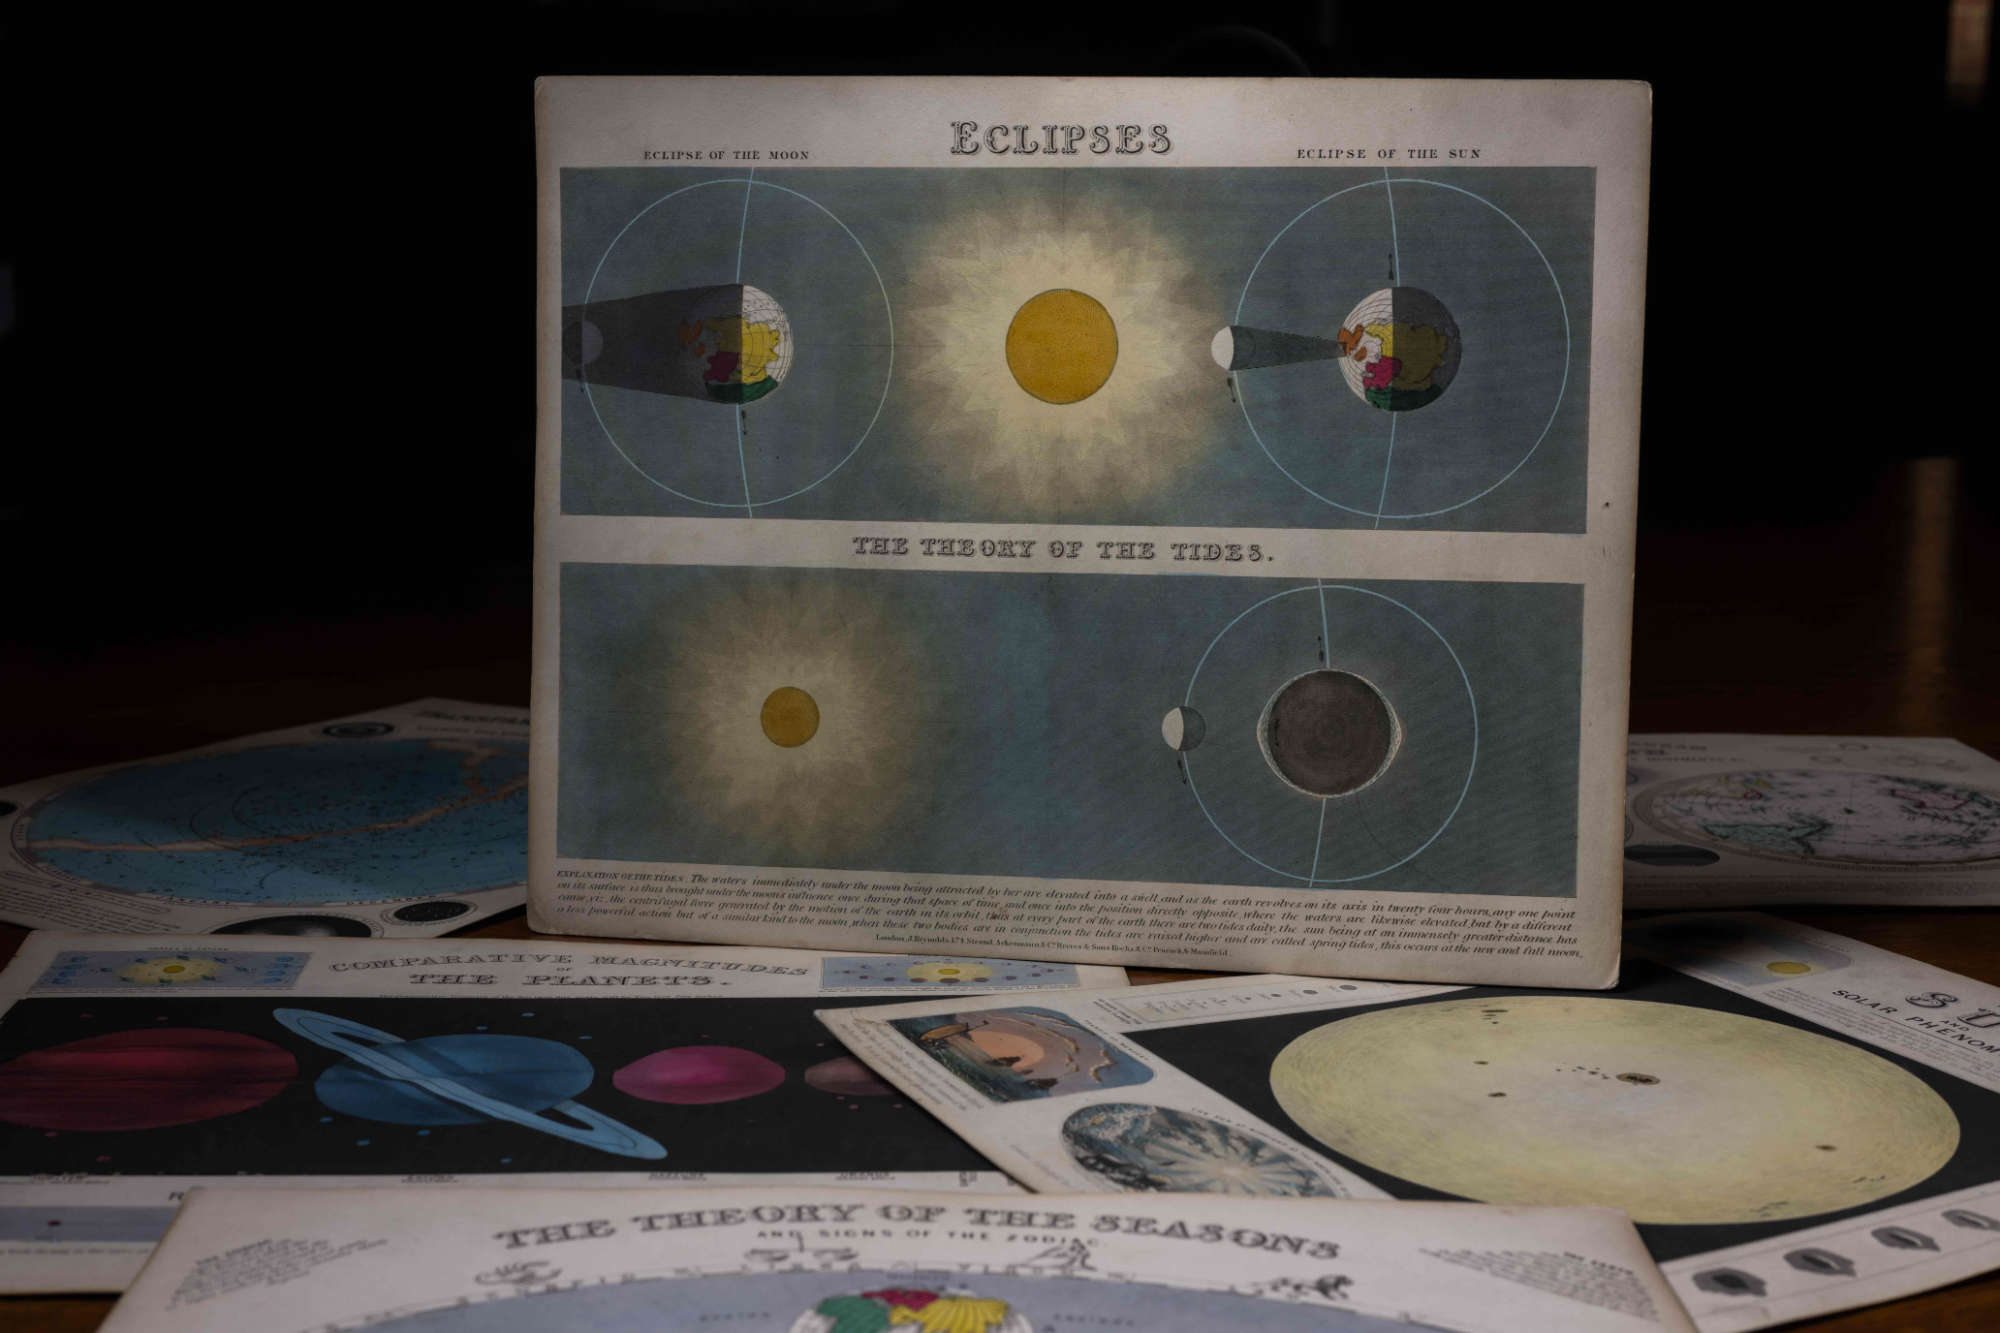 Several diagrams featuring color illustrations of geology, history, planets, and other astronomical phenomena laid flat on a table with one diagram about eclipses displayed vertically.